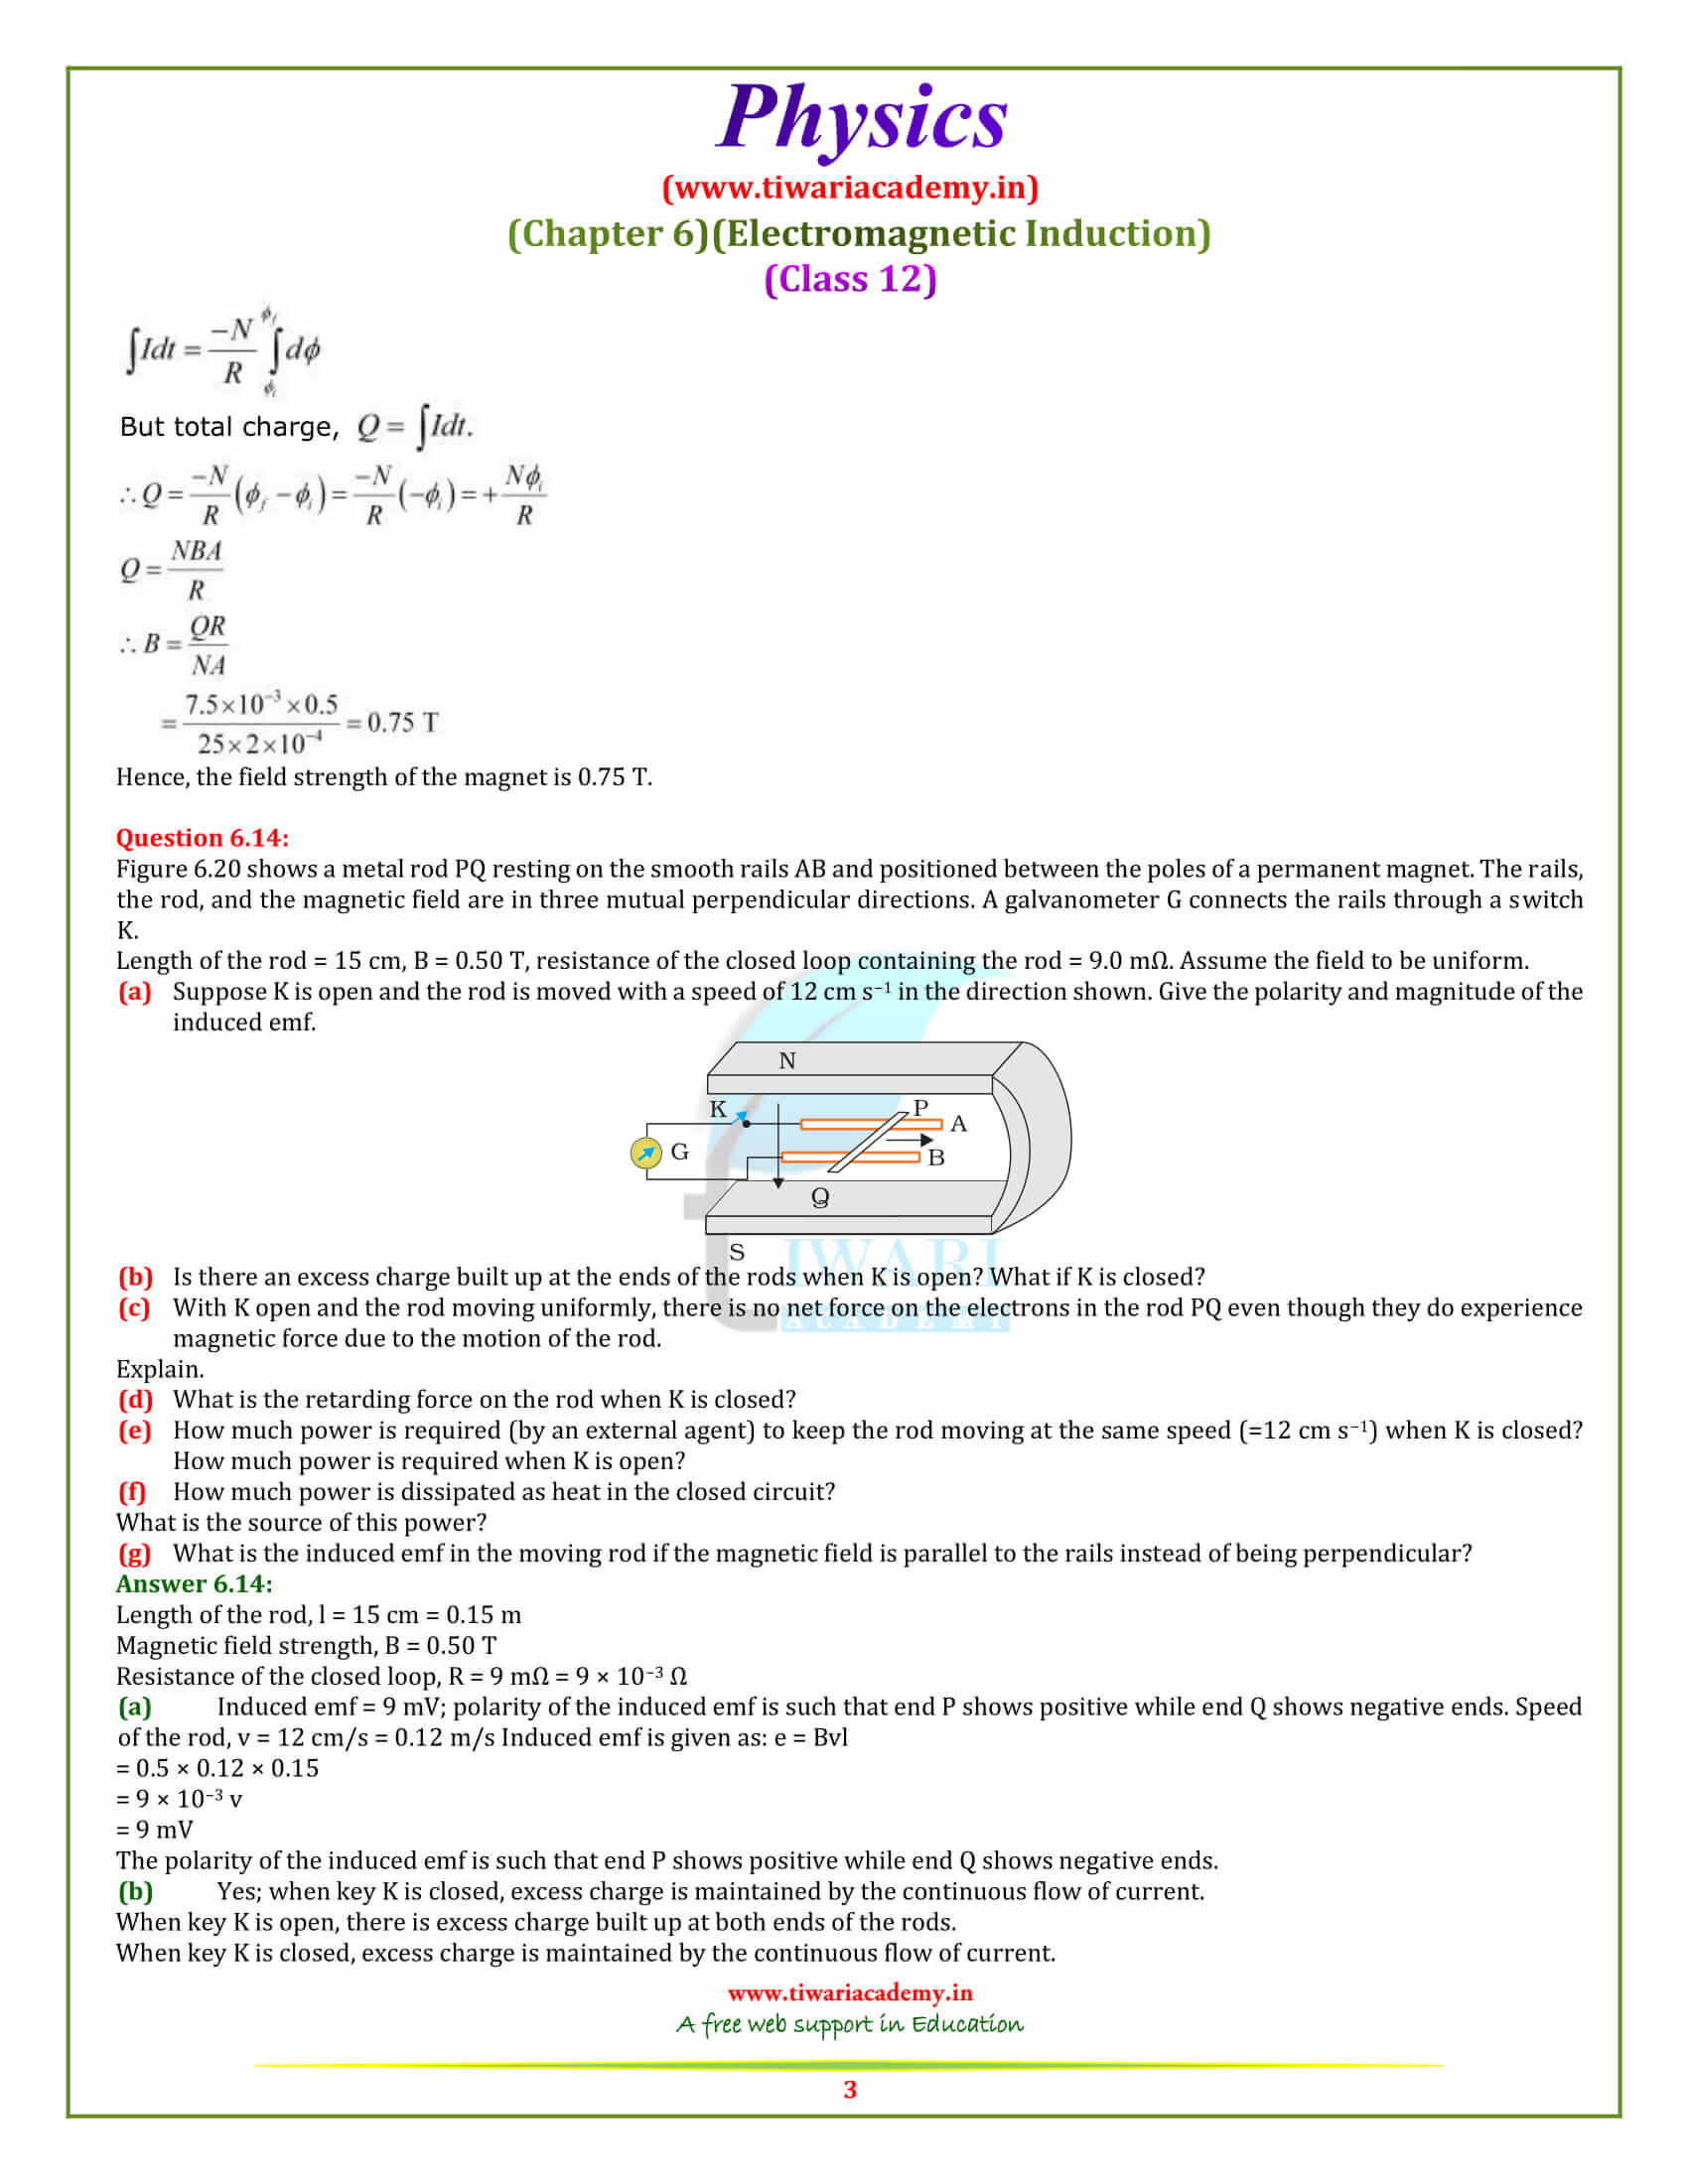 12 Physics Chapter 6 Electromagnetic Induction additional exercises all question answers